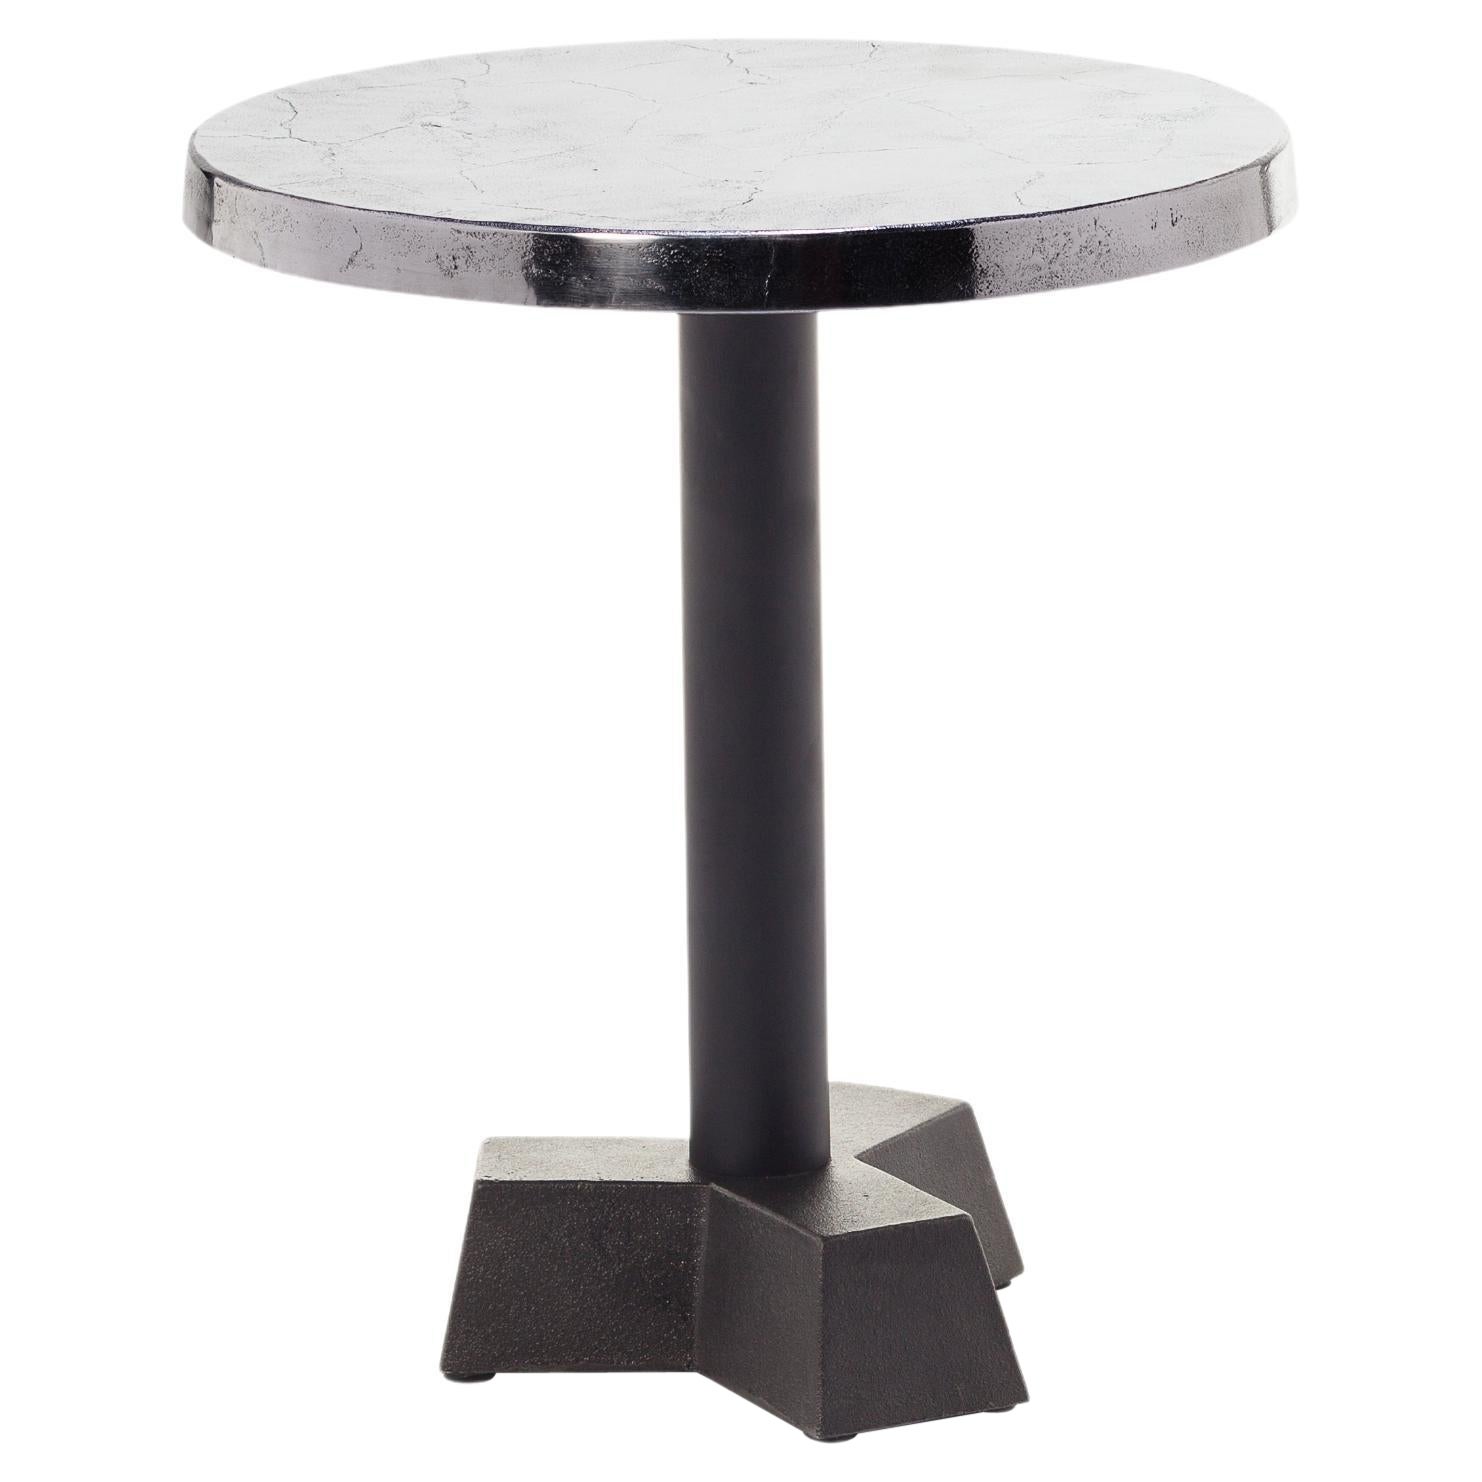 Gervasoni Small Brass Coffee Table in Cast Aluminium Top by Paola Navone For Sale